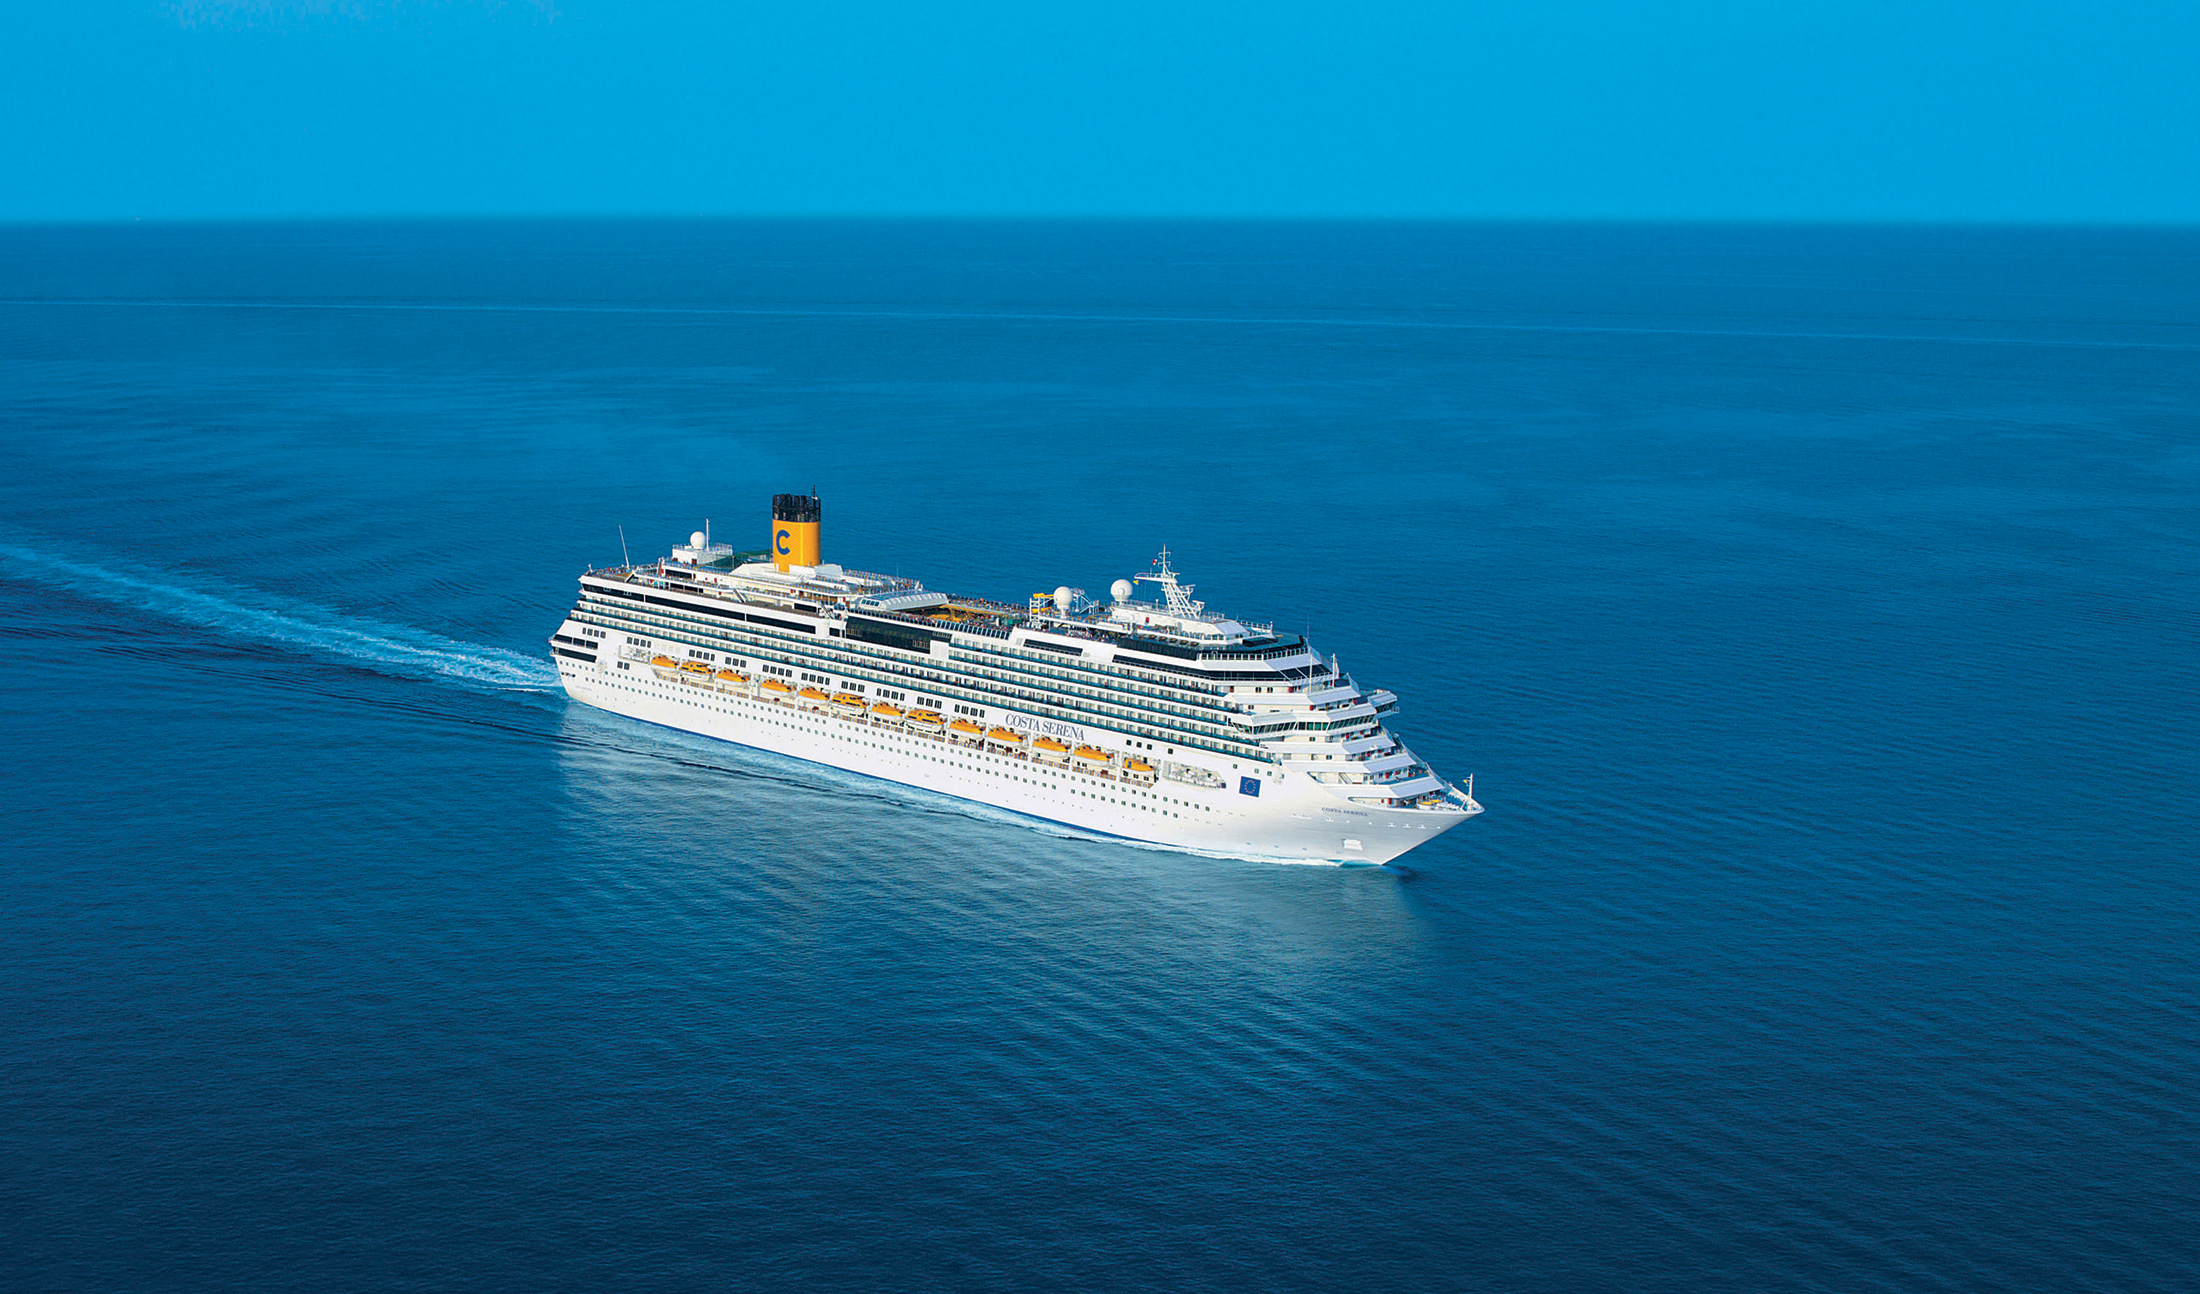 Protecting the world's oceans is essential to the survival of the cruise industry, which is why many companies such as Carnival Corporation have invested in eco-friendly initiatives. The company's Costa Serena cruise ship, run by Costa Cruises, is pictured above